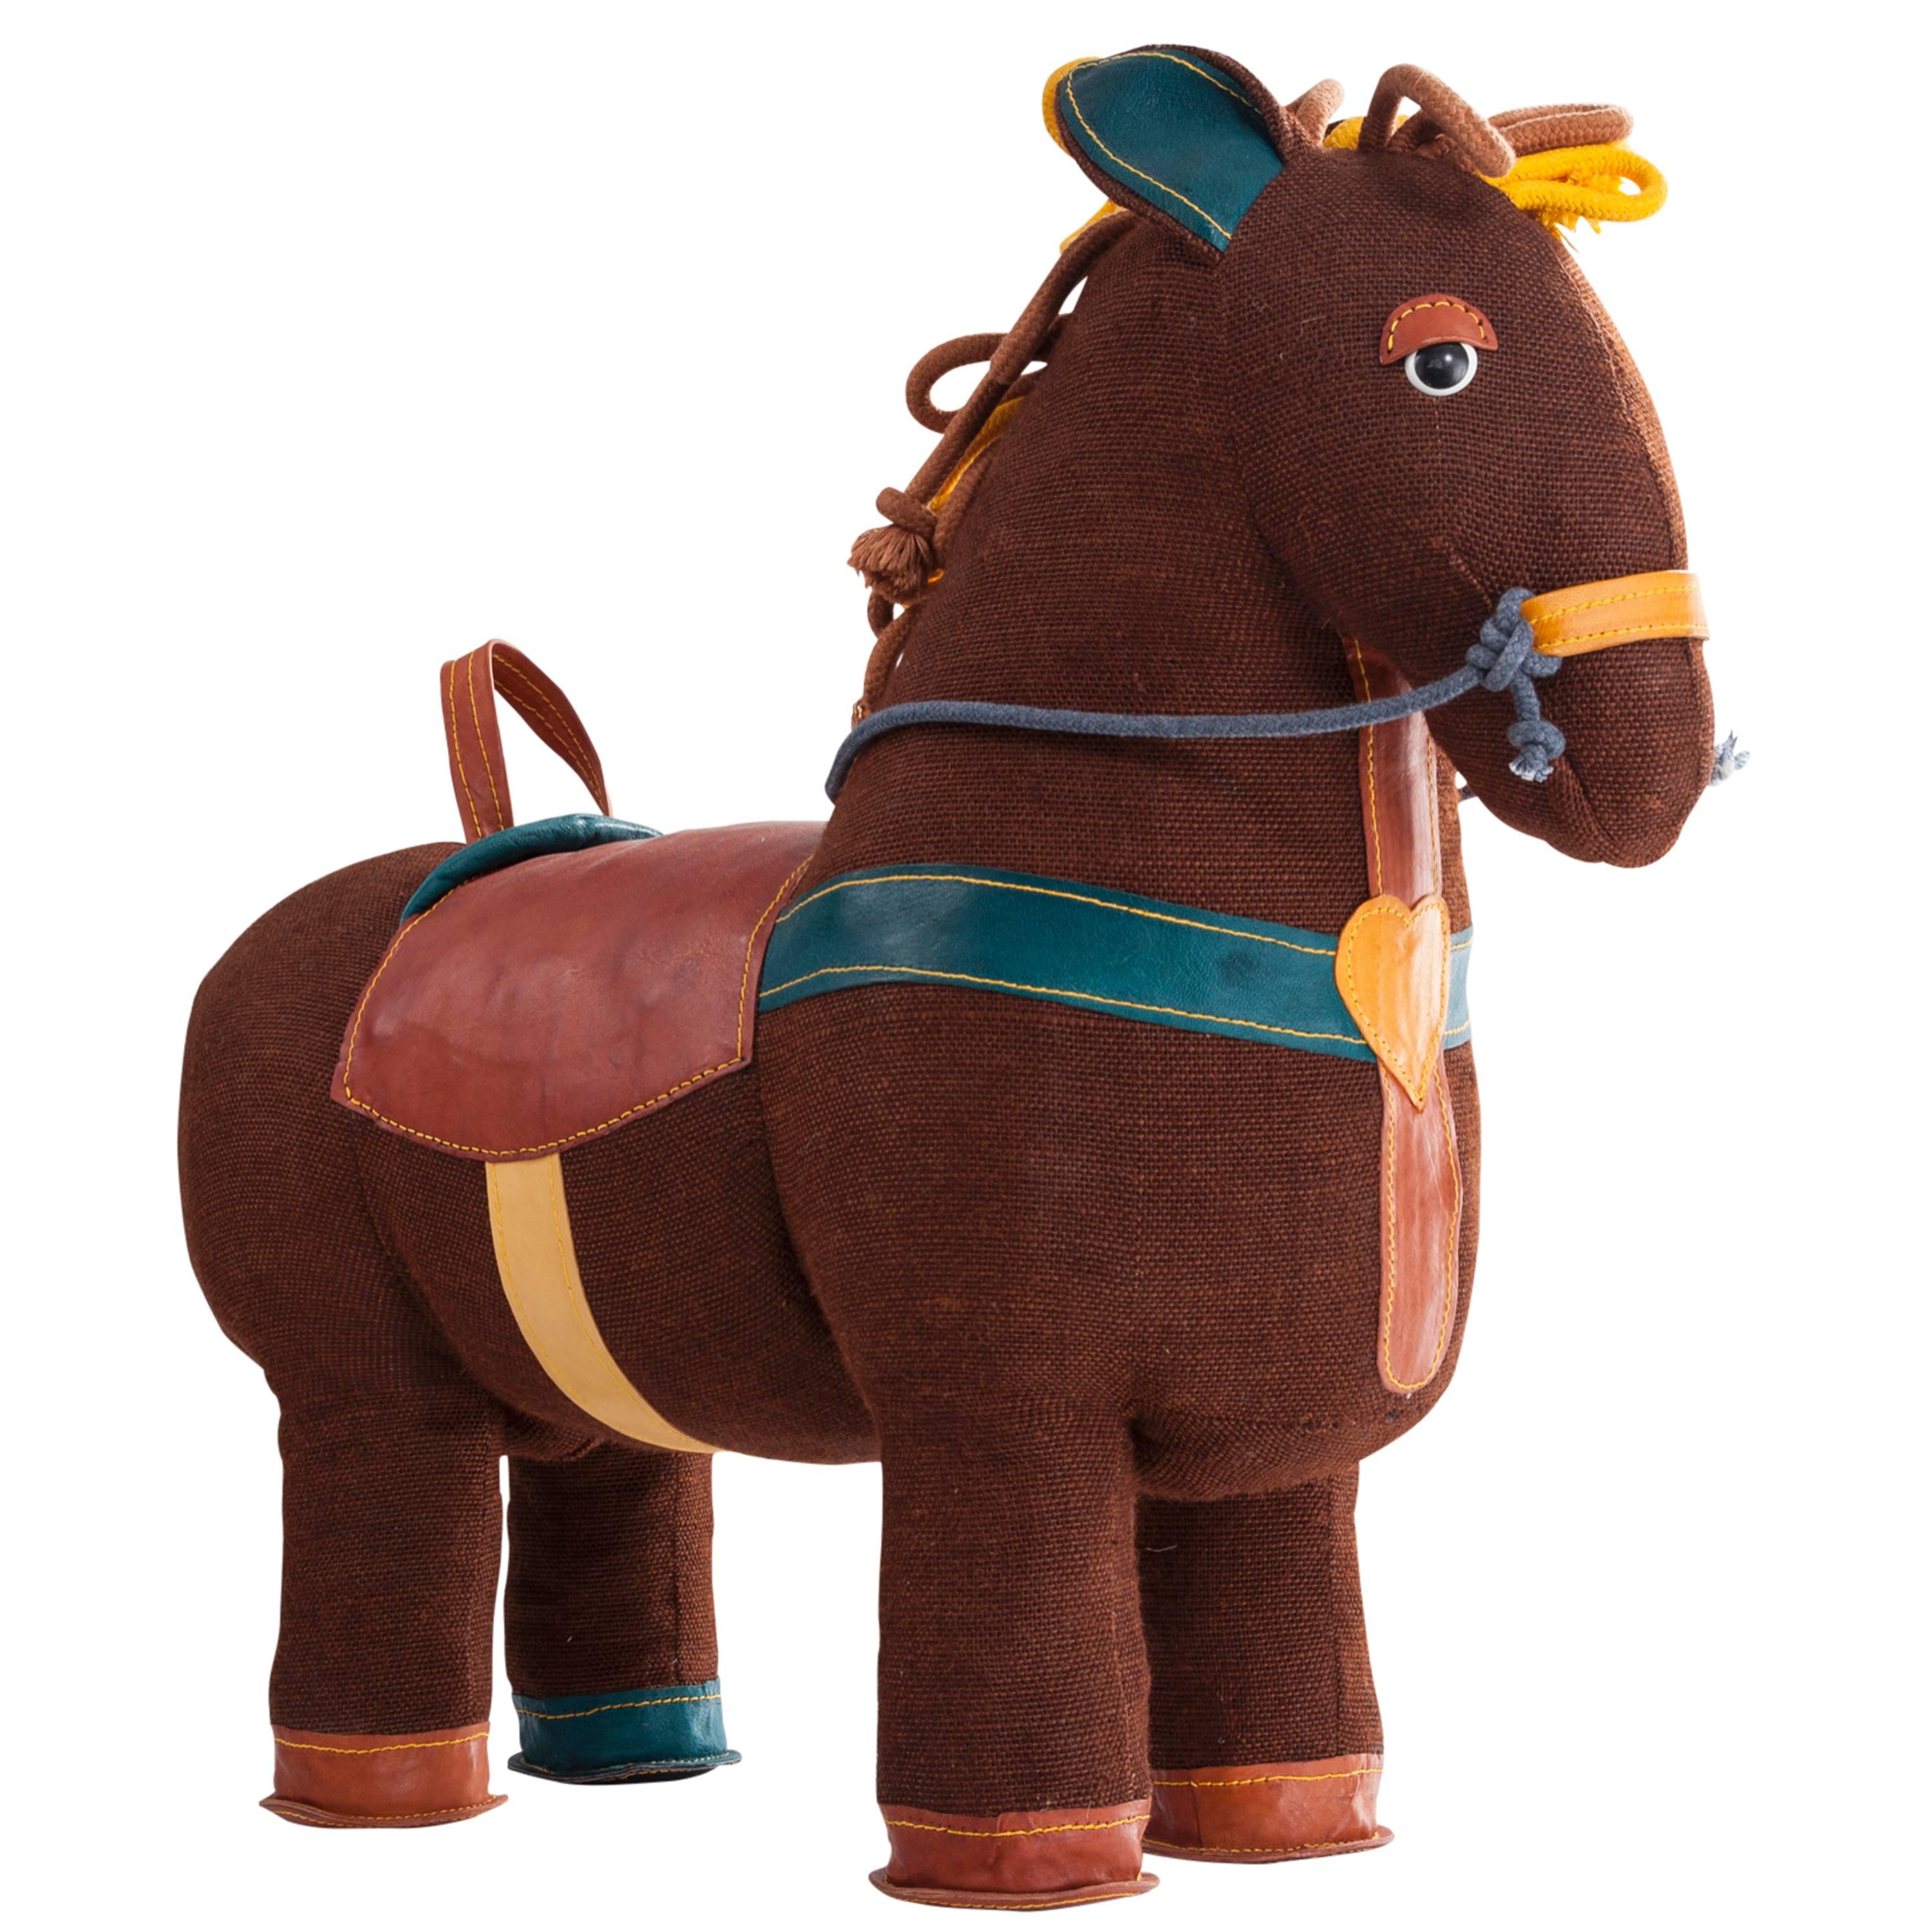 "Therapeutic Toy" Magic Horse in Brown Jute by Renate Müller, 2015